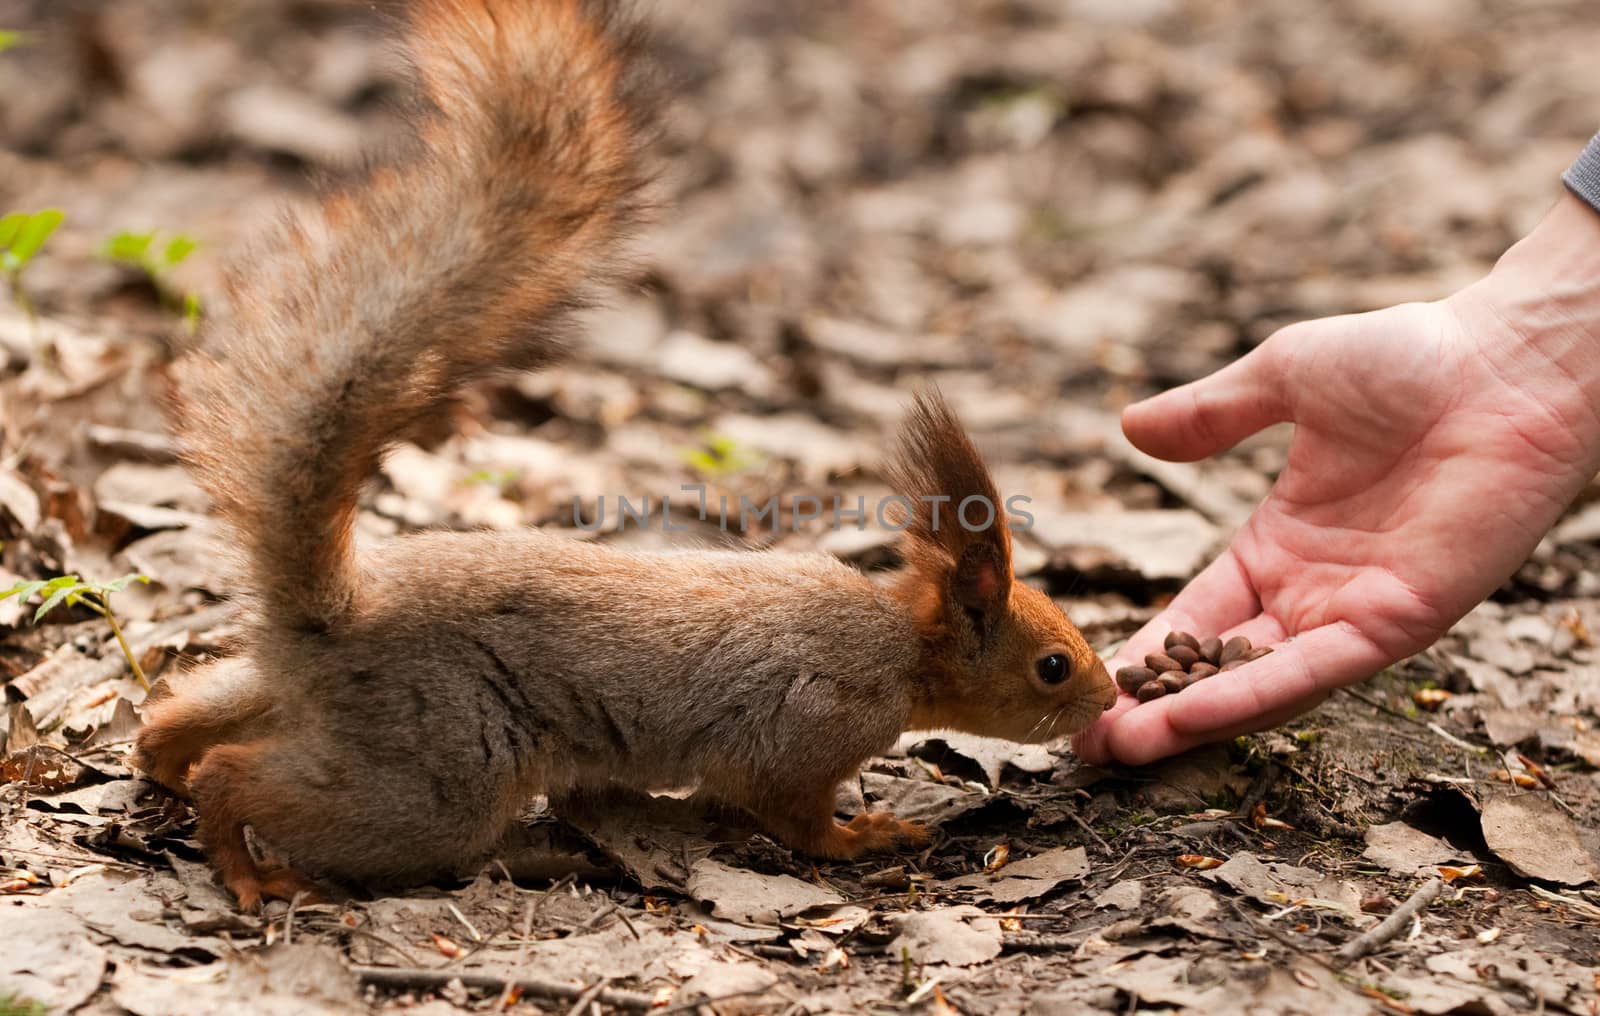 Little squirrel taking nuts from human hand in park by lexan